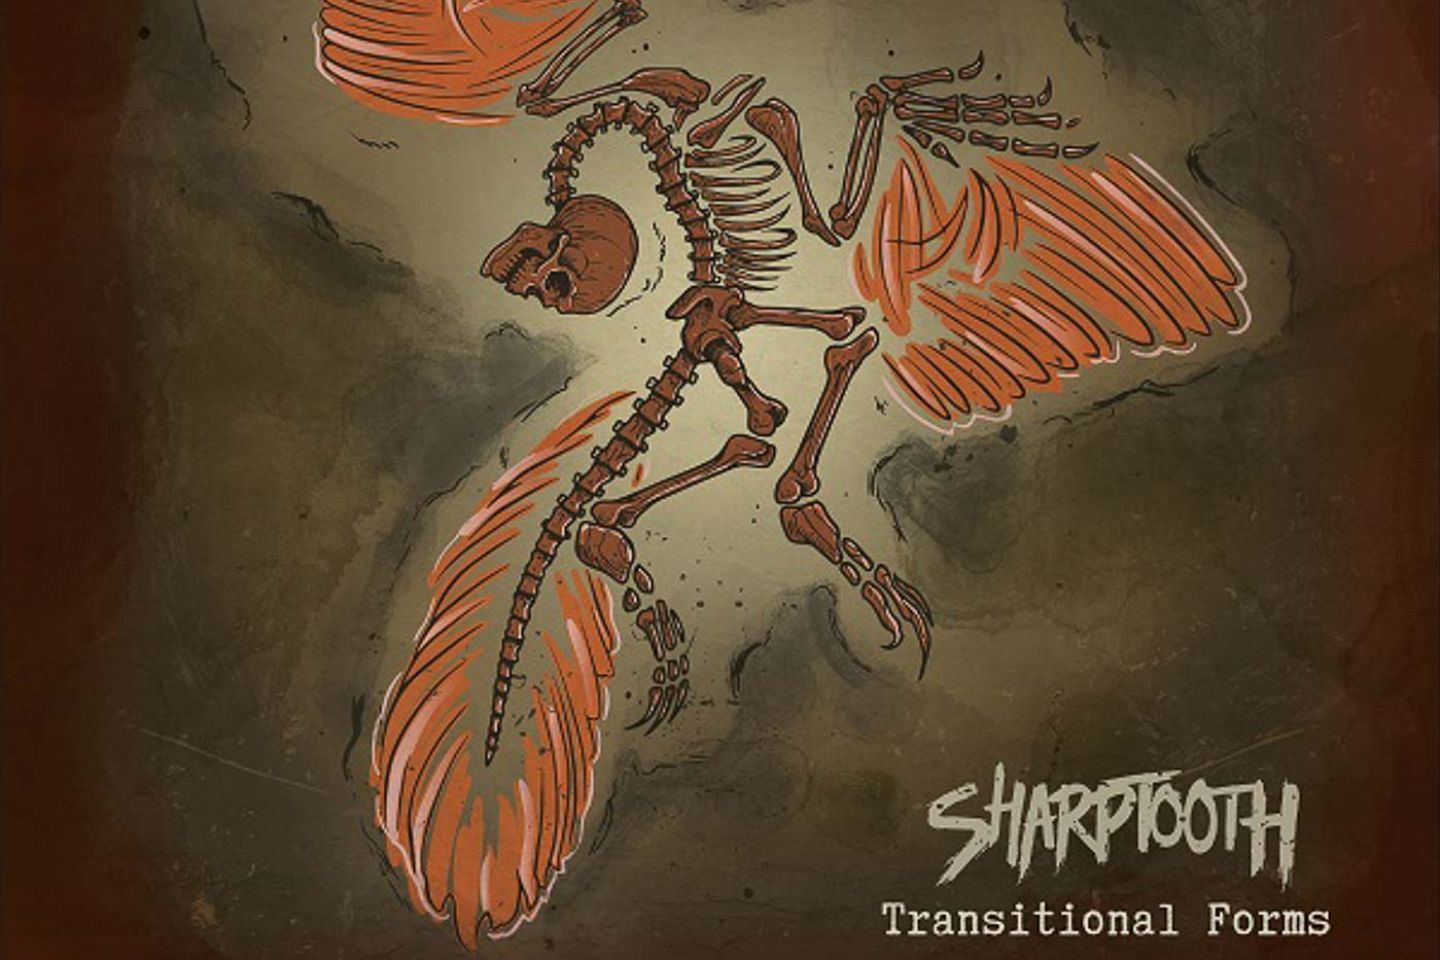 Sharptooth “Transitional Forms” (Pure Noise Records, 2020)